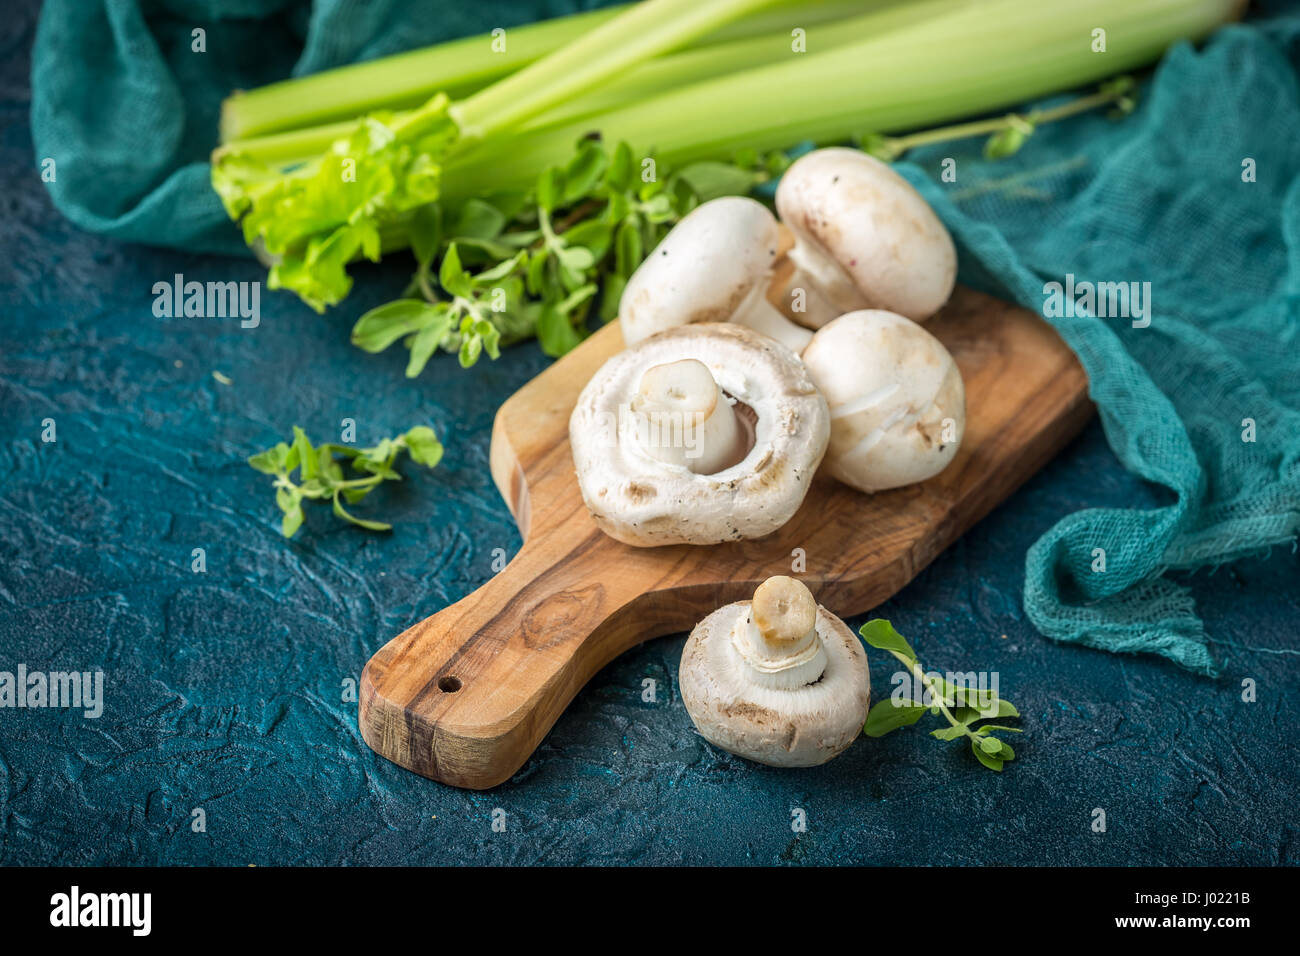 Fresh mushrooms champignons on a wooden cutting board, parsley and stalks of celery on a dark blue background Stock Photo